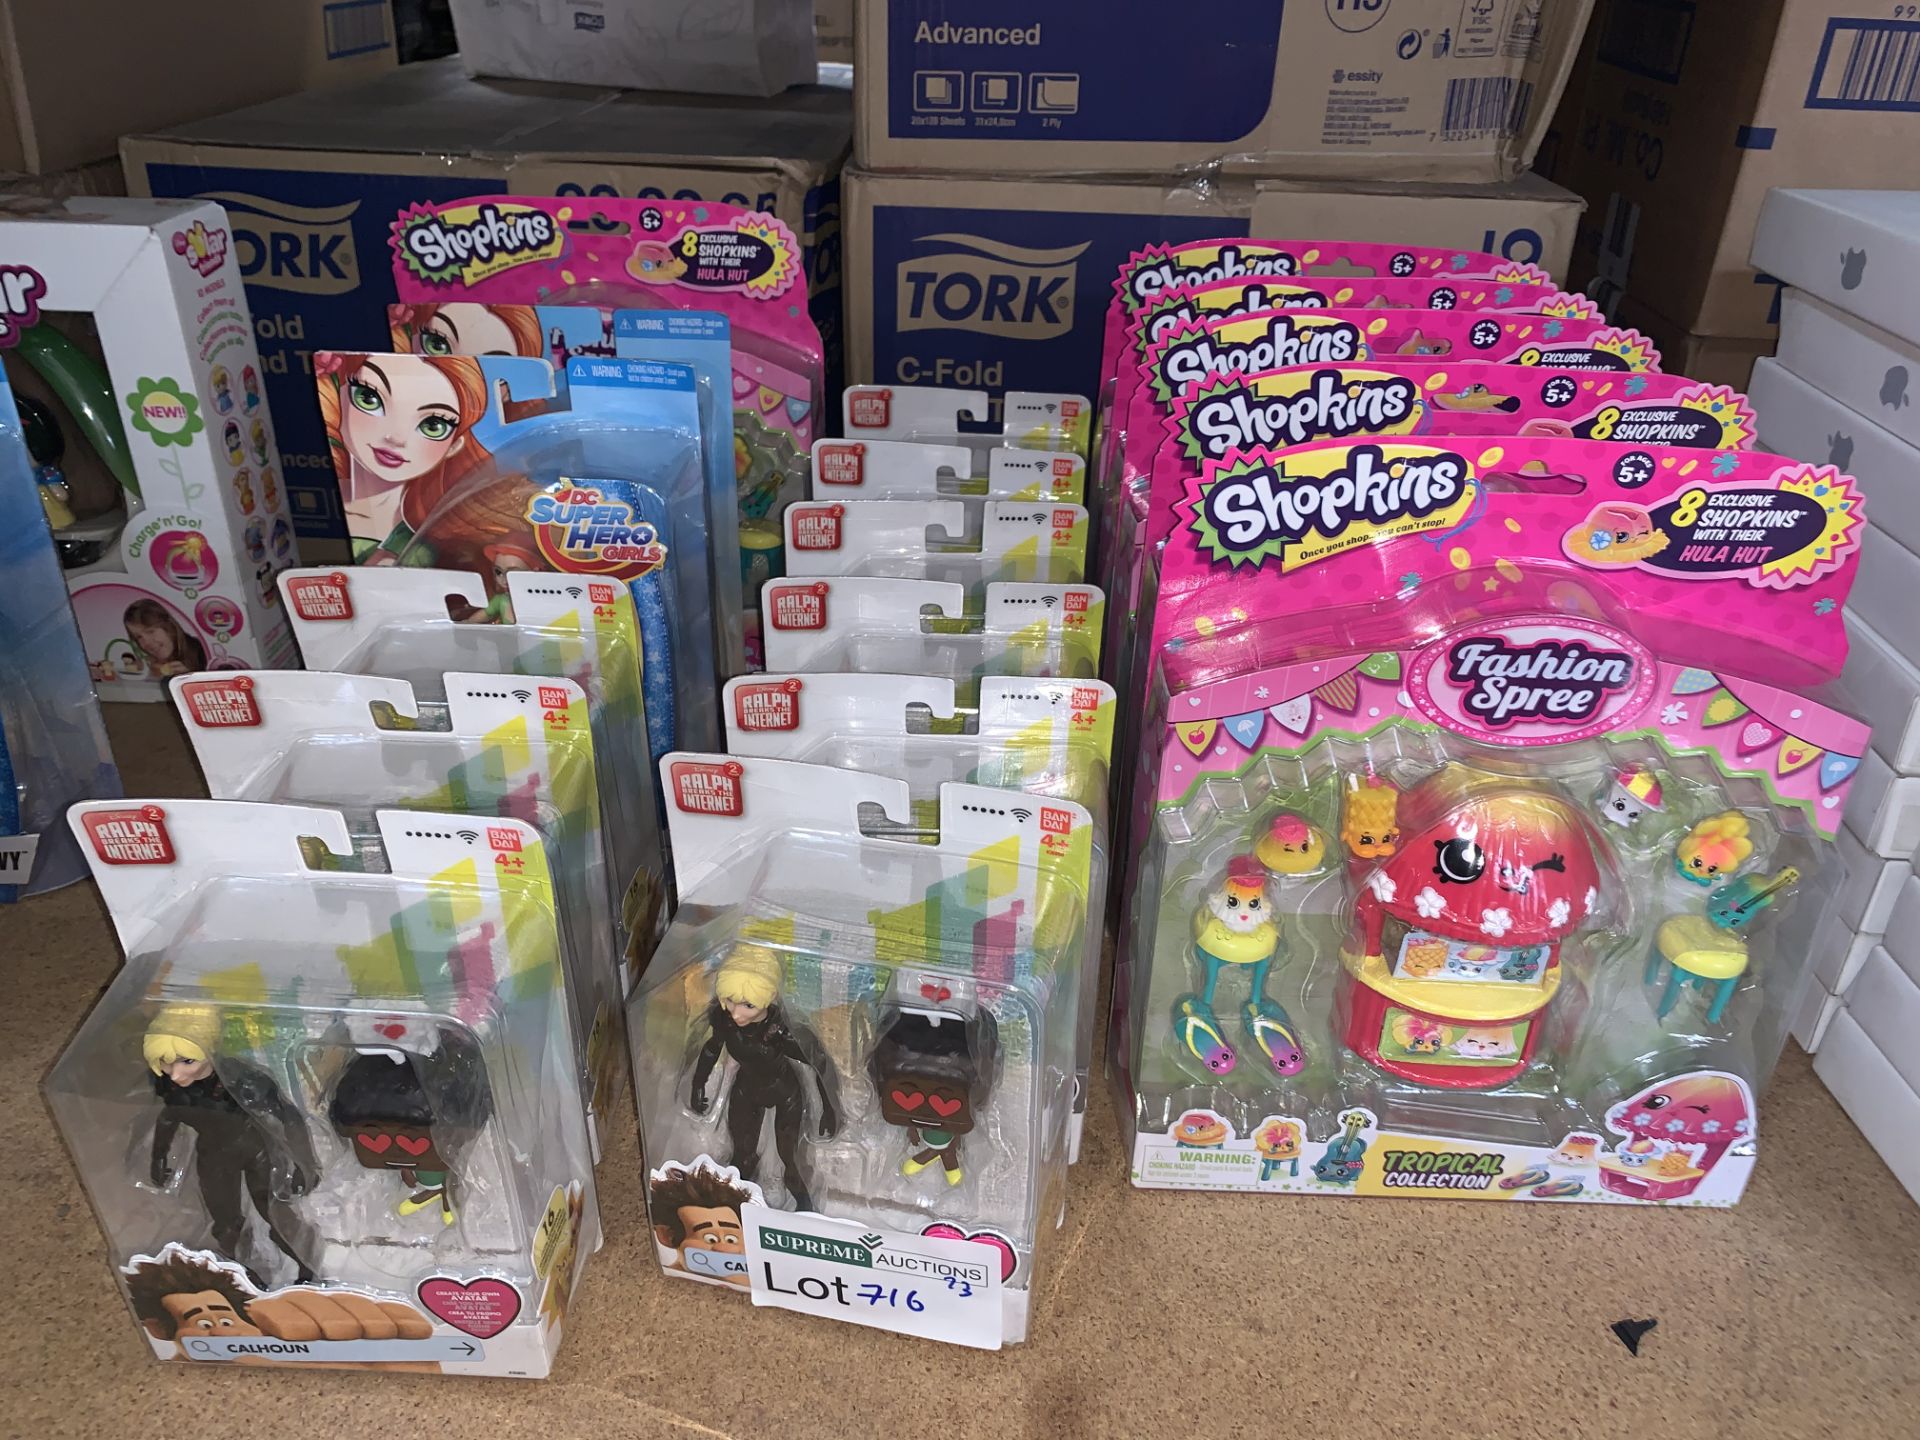 MIXED TOY LOT INCLUDING SHOPKINS FASHION SPREE, DC SUPER HERO, RALPH BREAKS THE INTERNET ETC